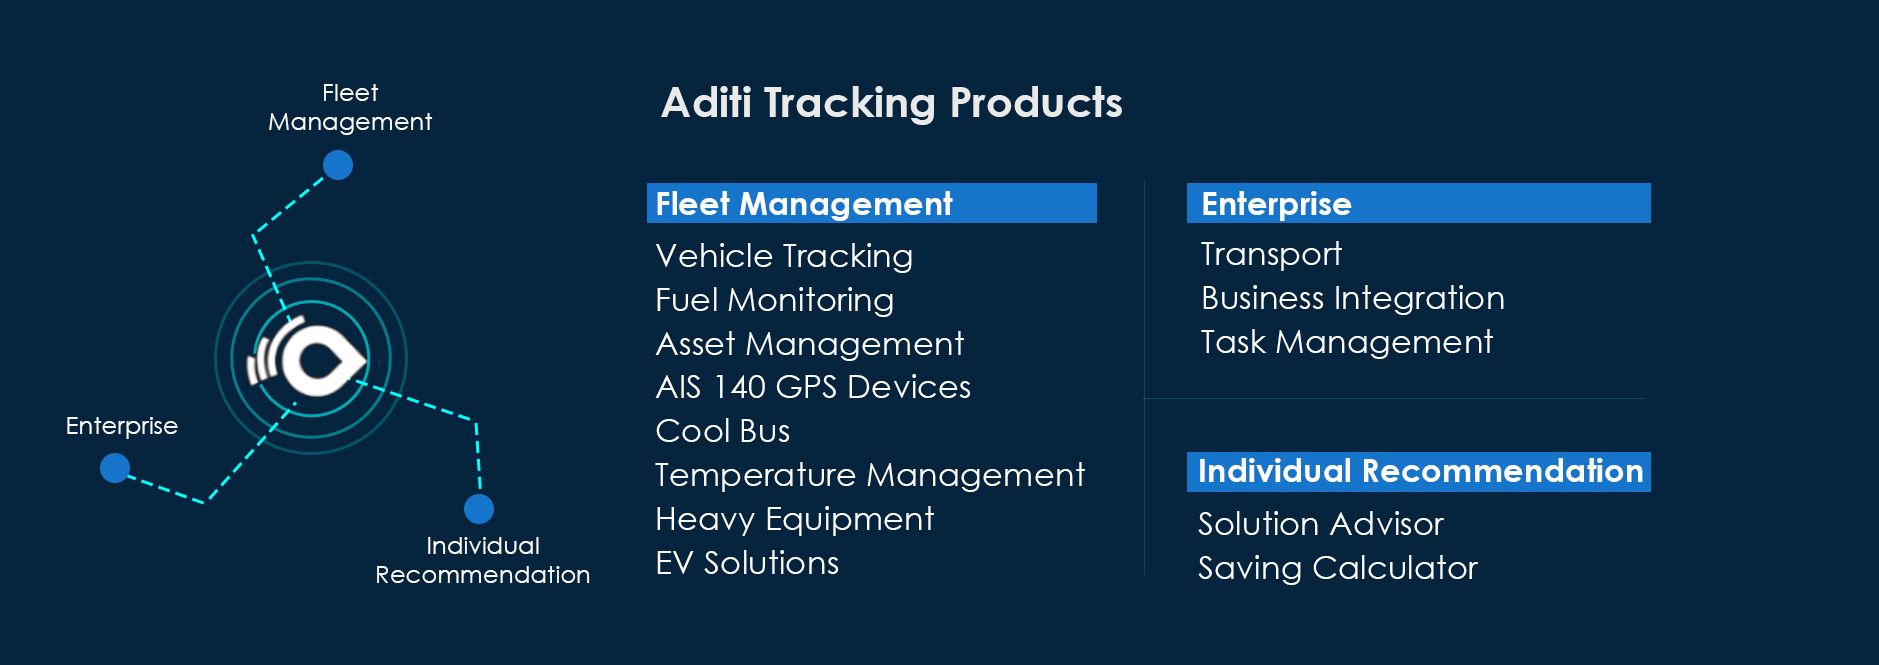 Aditi Tracking Services and Products